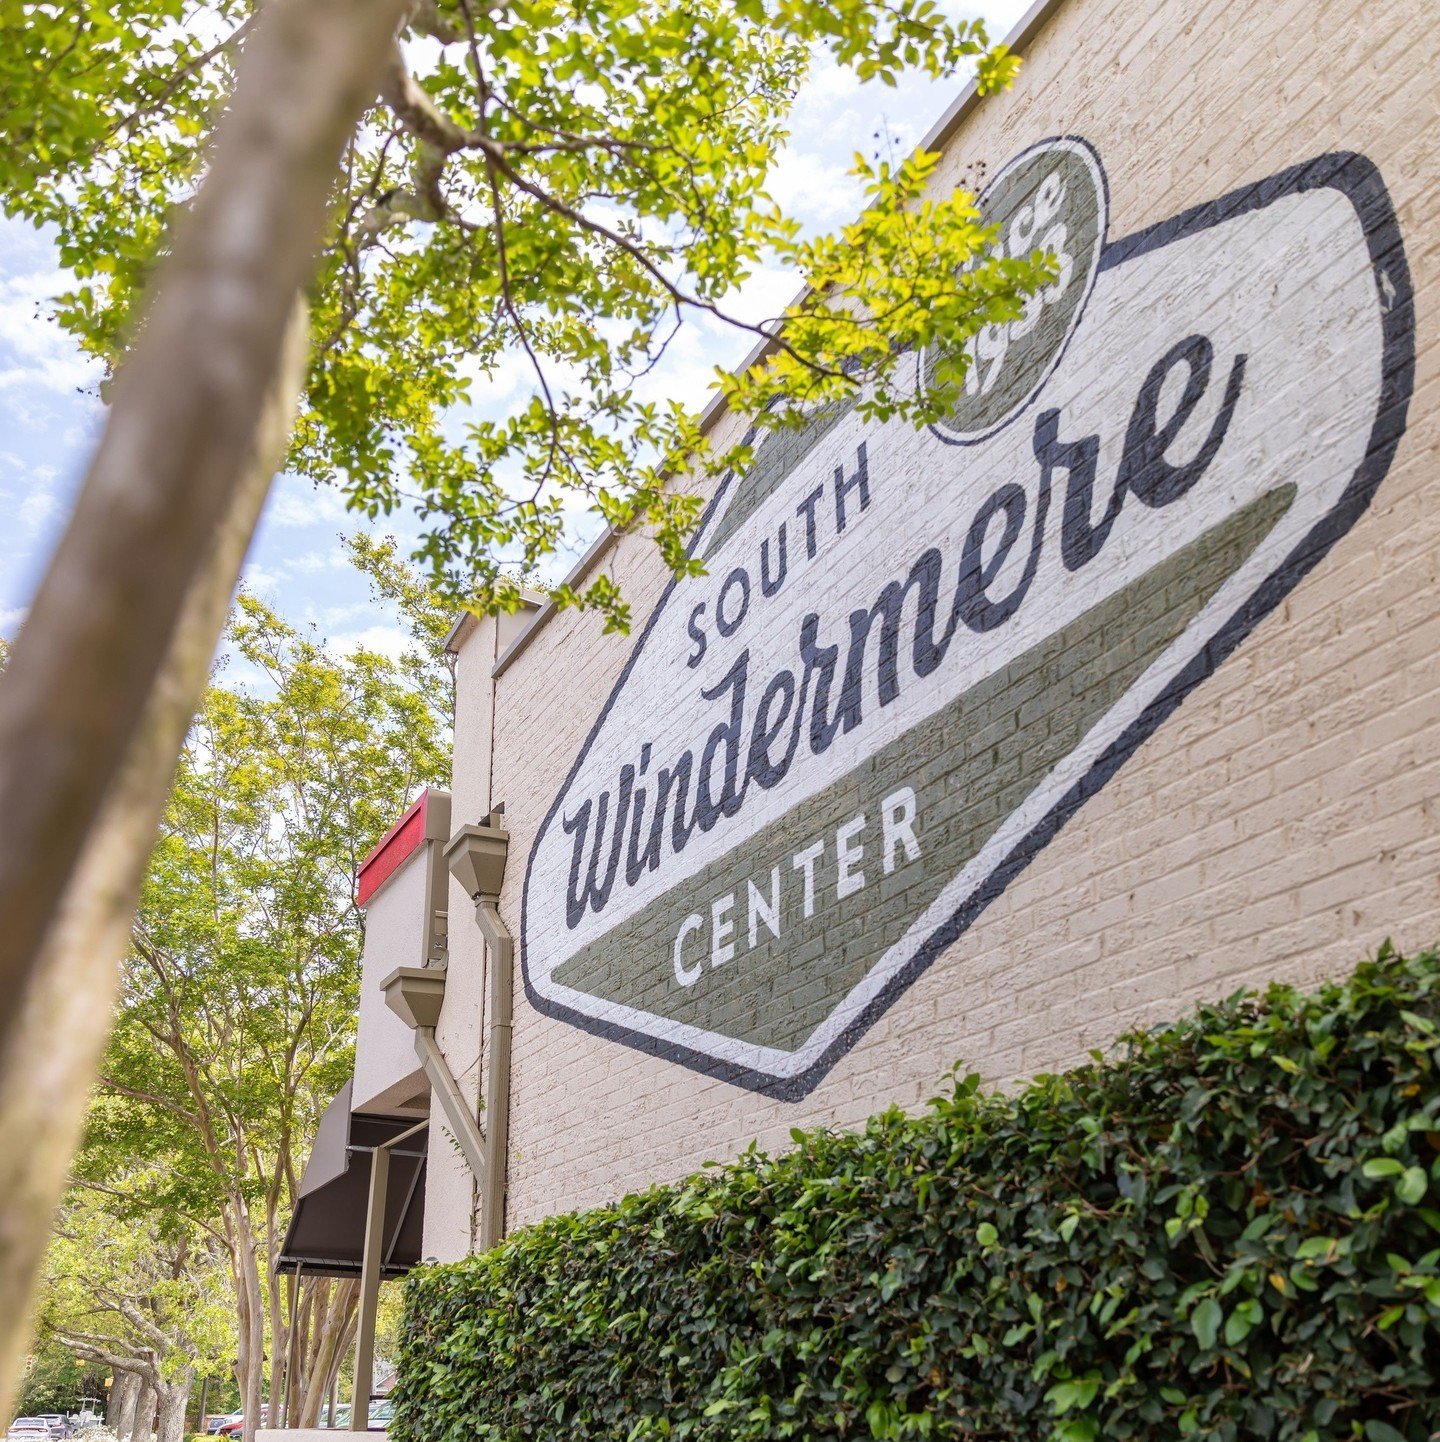 Today is the day! Join us from 11am-3pm for the Spring Stroll at South Windermere Center! 🌼 With live music, great local shopping, discounts, raffles, and fun family activities you won't want to miss! From mouthwatering treats to fabulous finds we'v